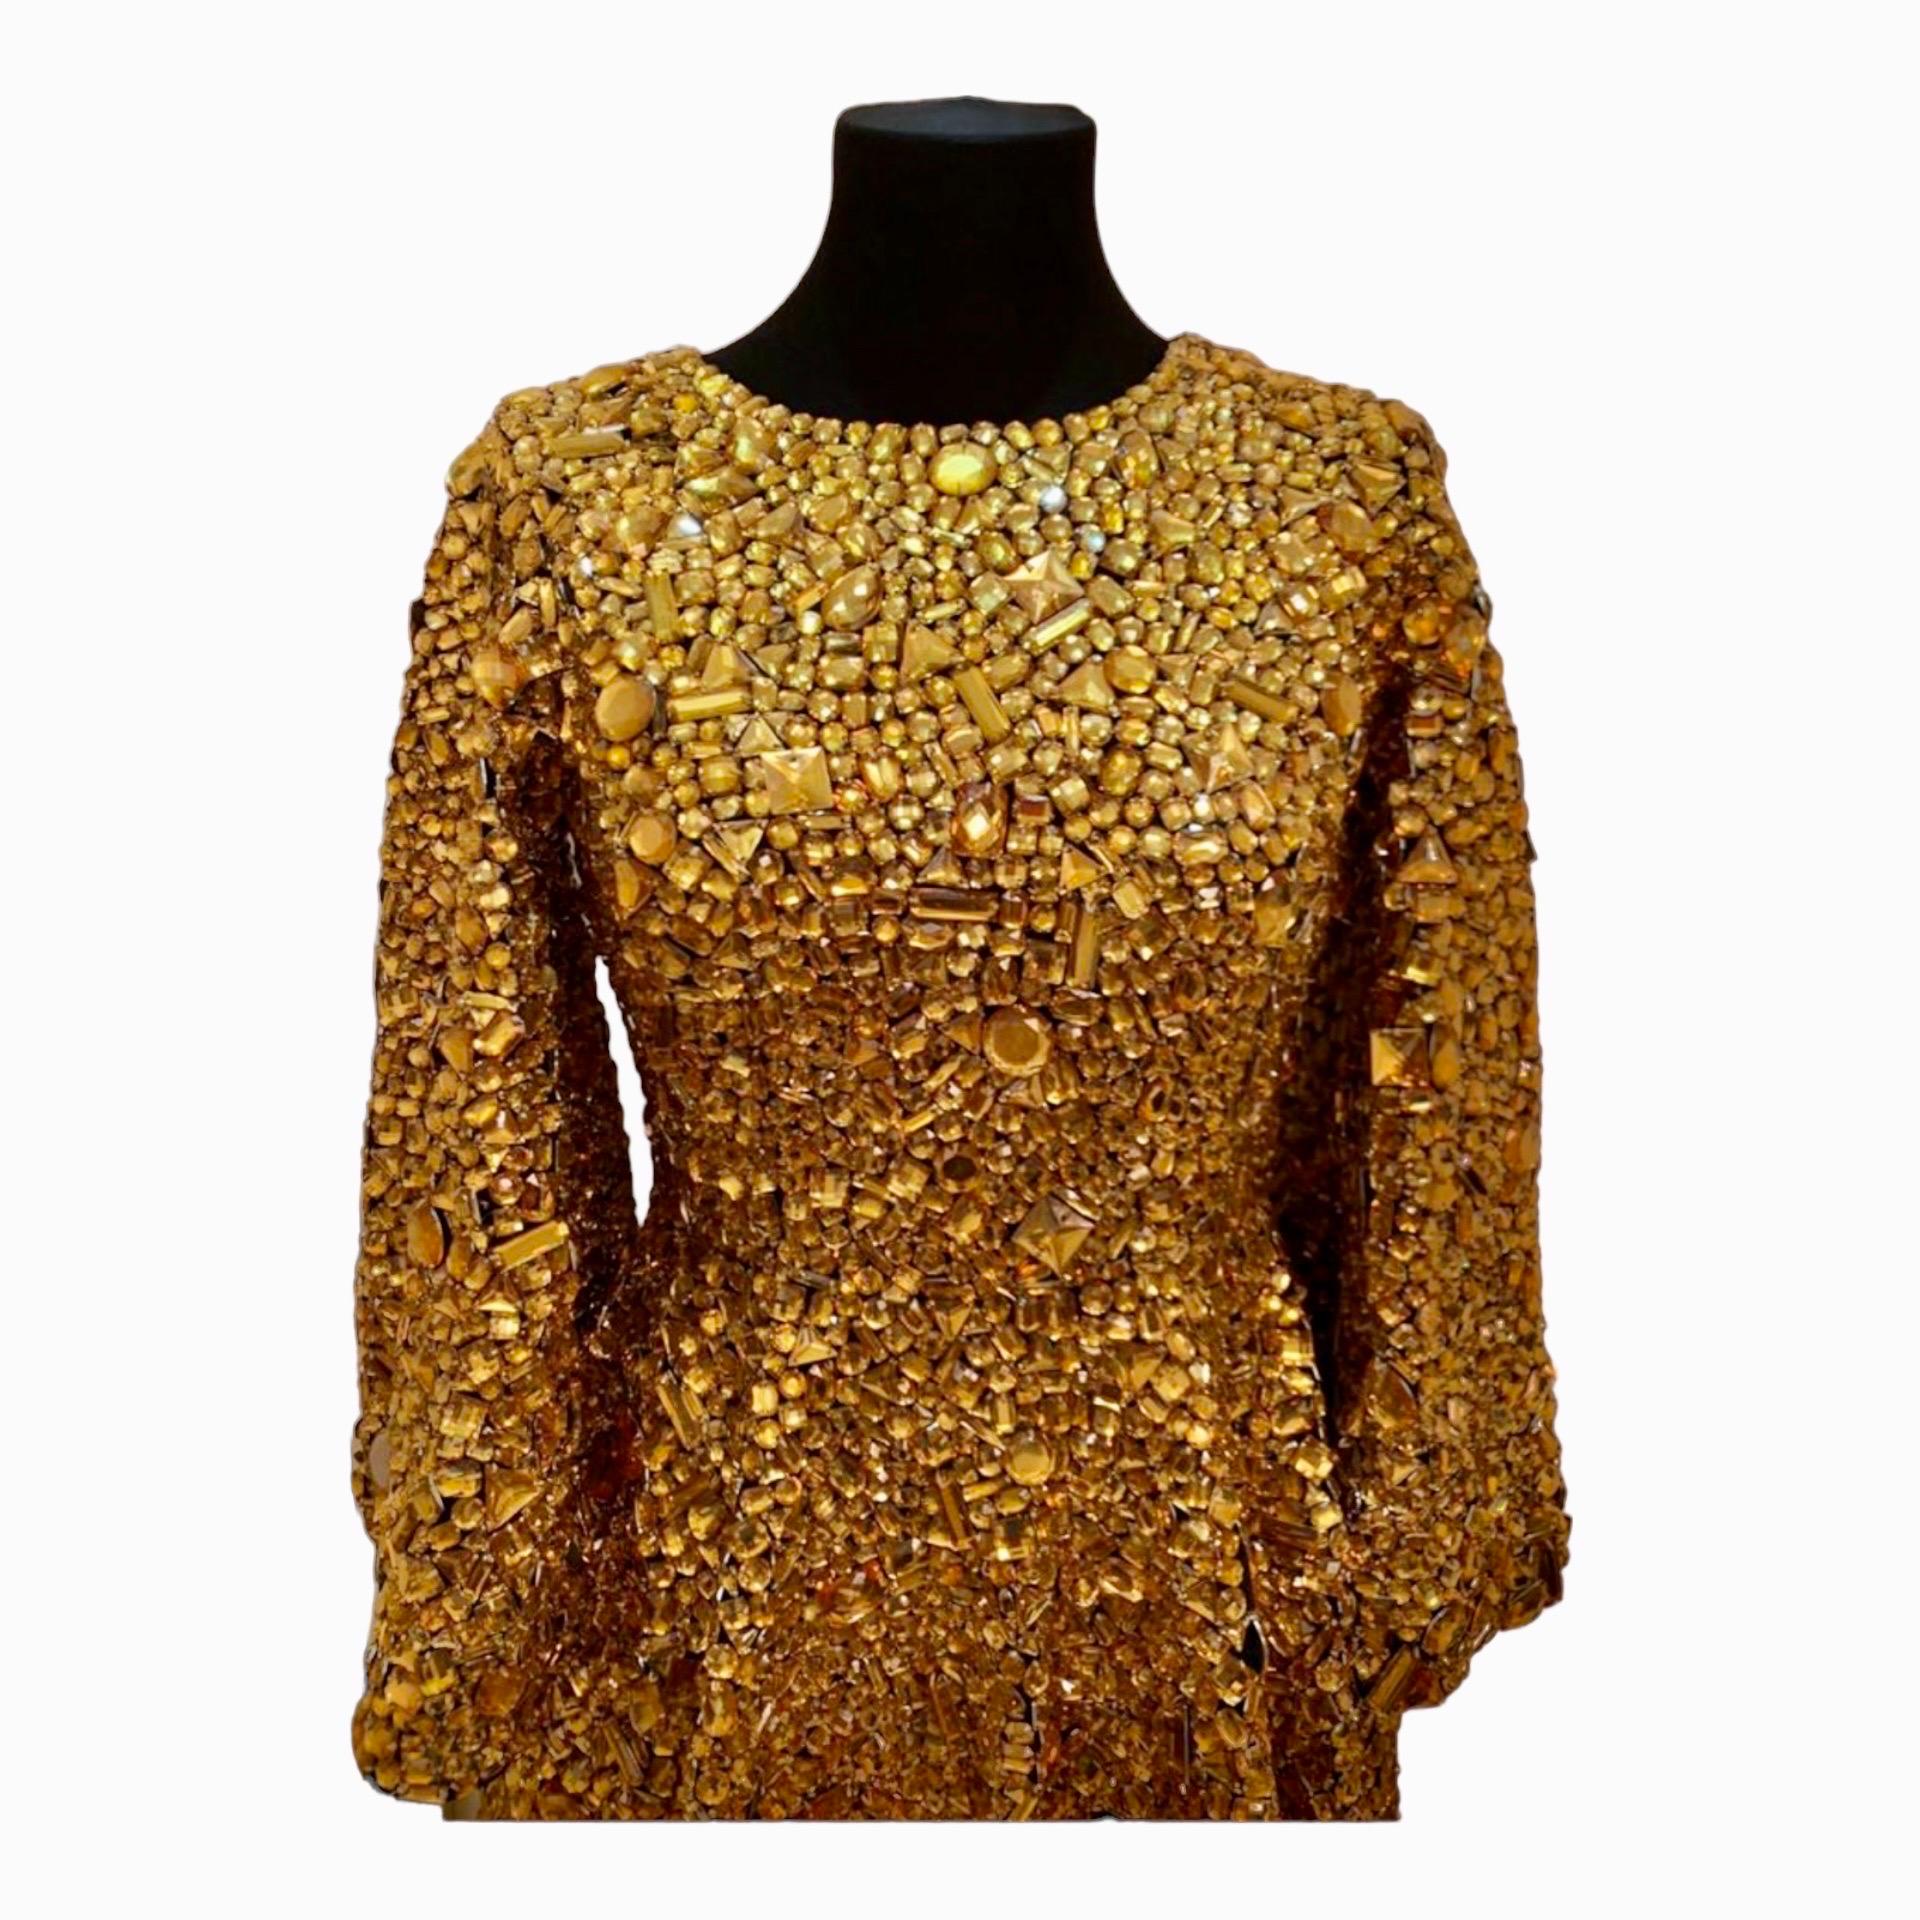 Women's 2014 Dolce & Gabbana Couture Limited Edition Crystal Embellished Dress